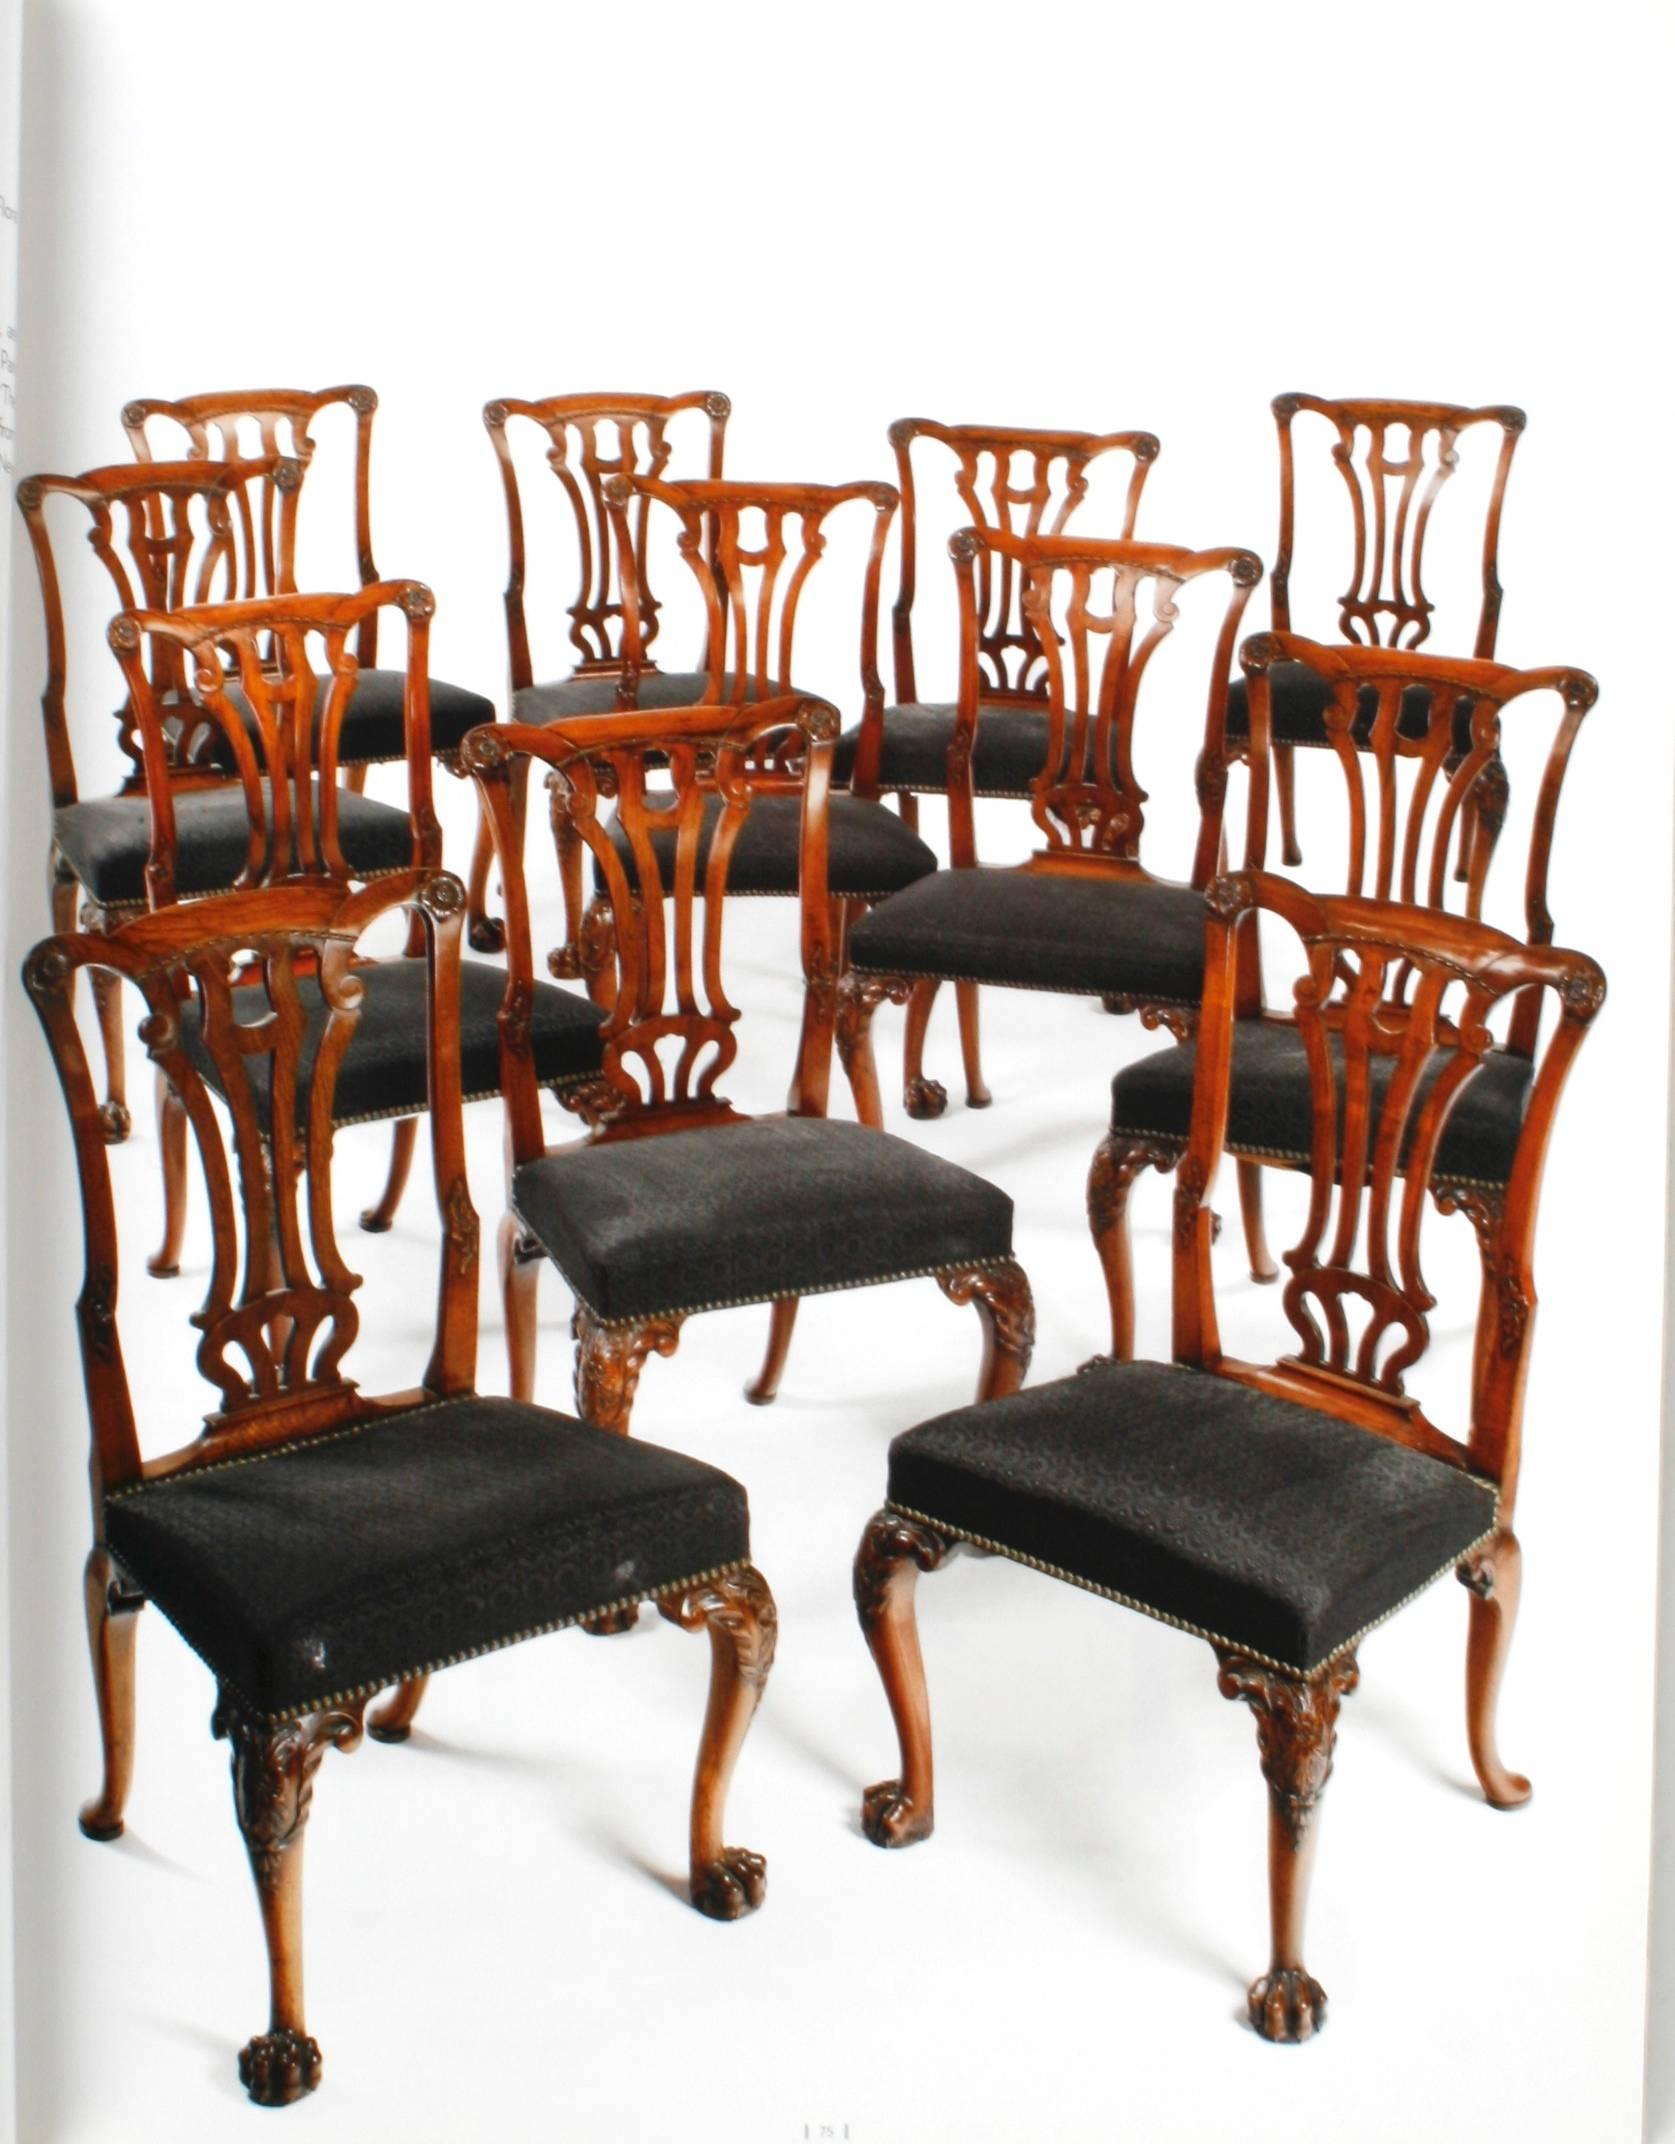 Paper Sotheby's, Tom Devenish Collection of Important English Furniture, 2008 For Sale